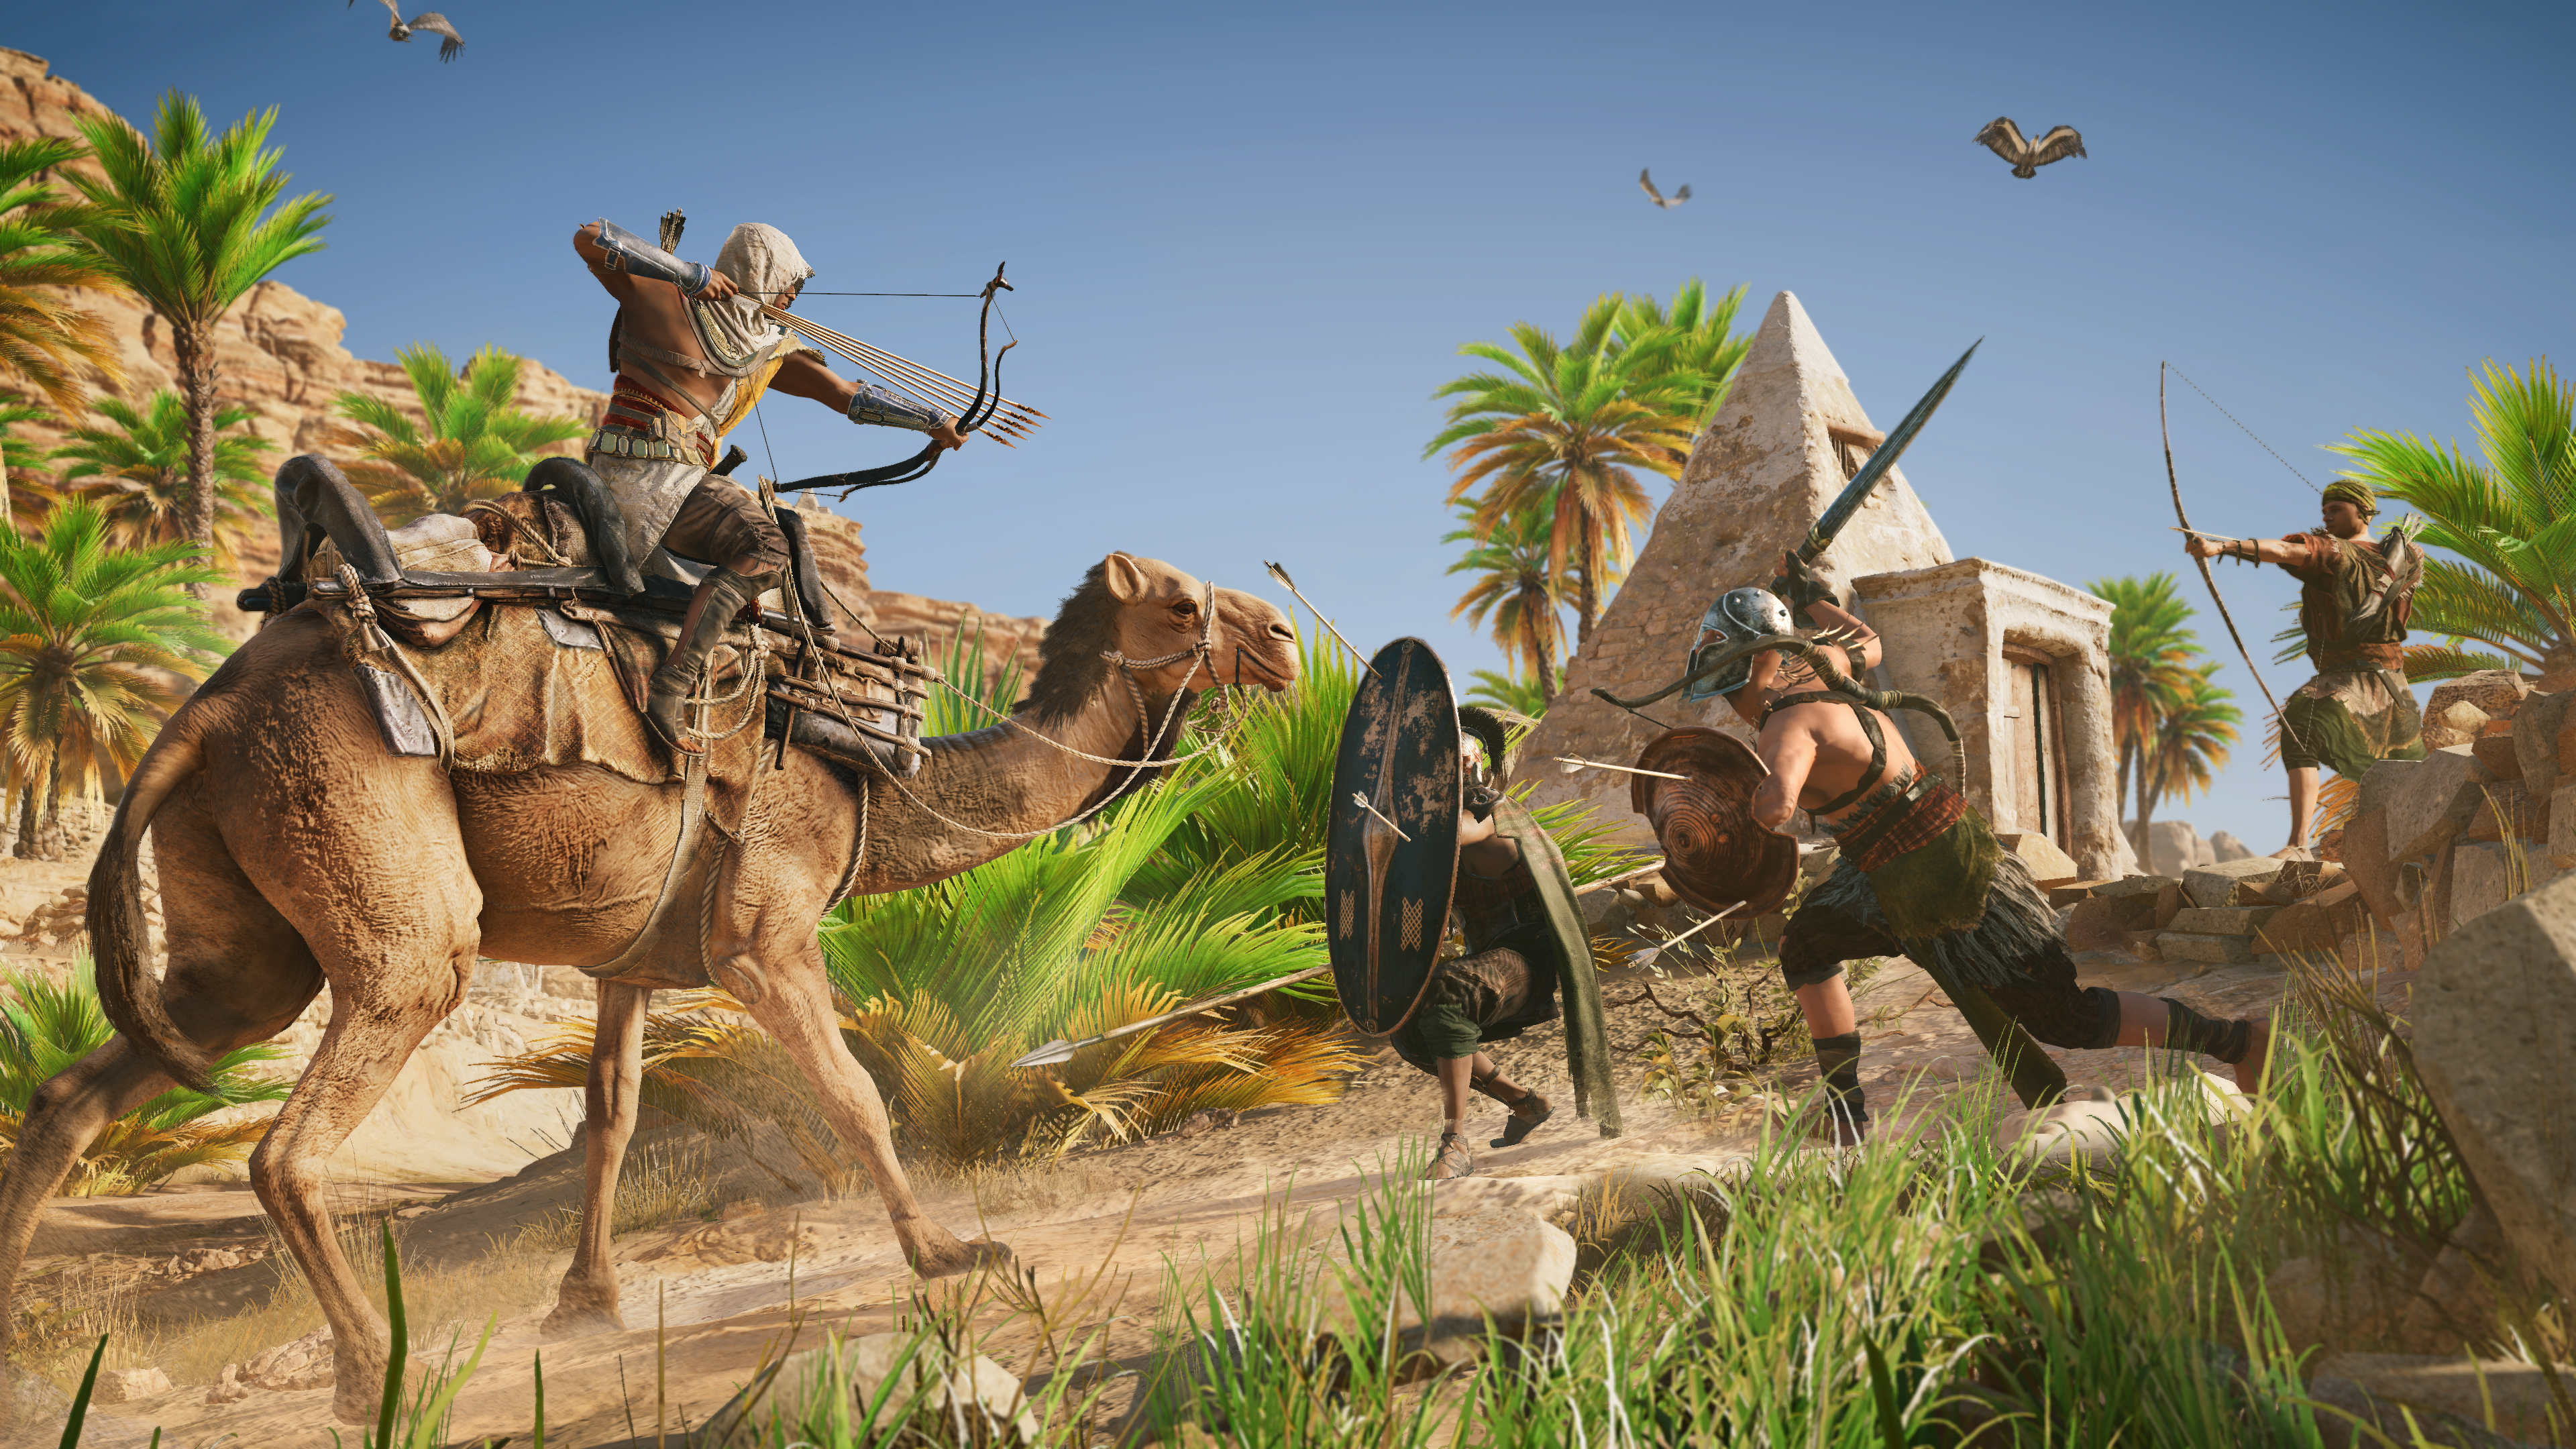 assassin's creed origins, video game, bayek of siwa, assassin's creed lock screen backgrounds